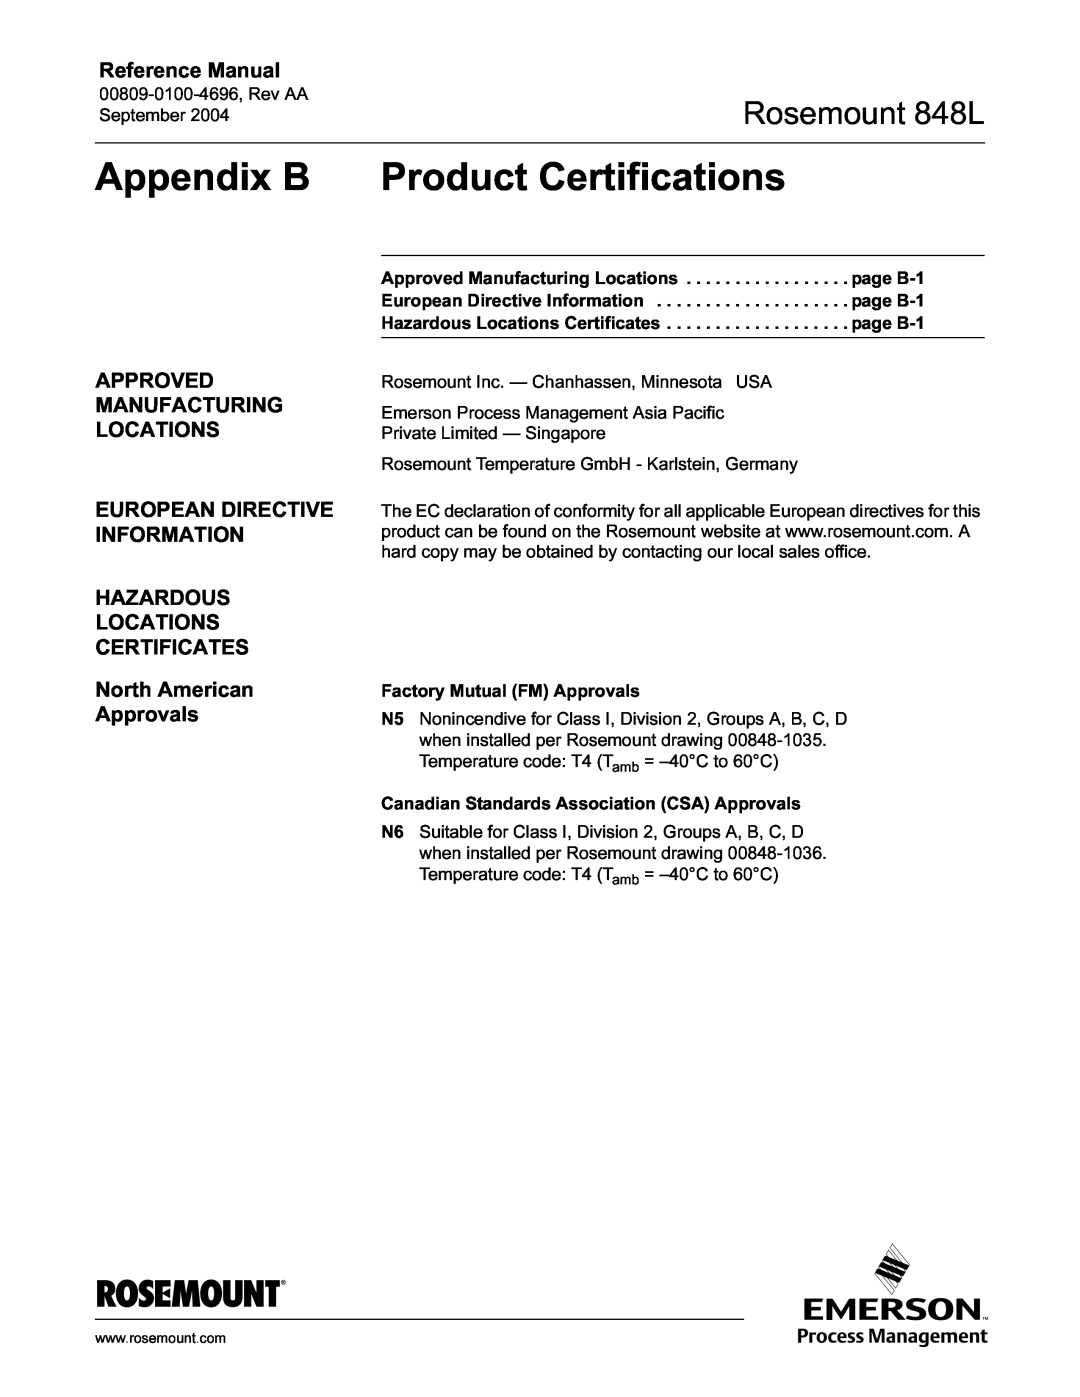 Emerson 848L Appendix B Product Certifications, Approved Manufacturing Locations, European Directive Information Hazardous 